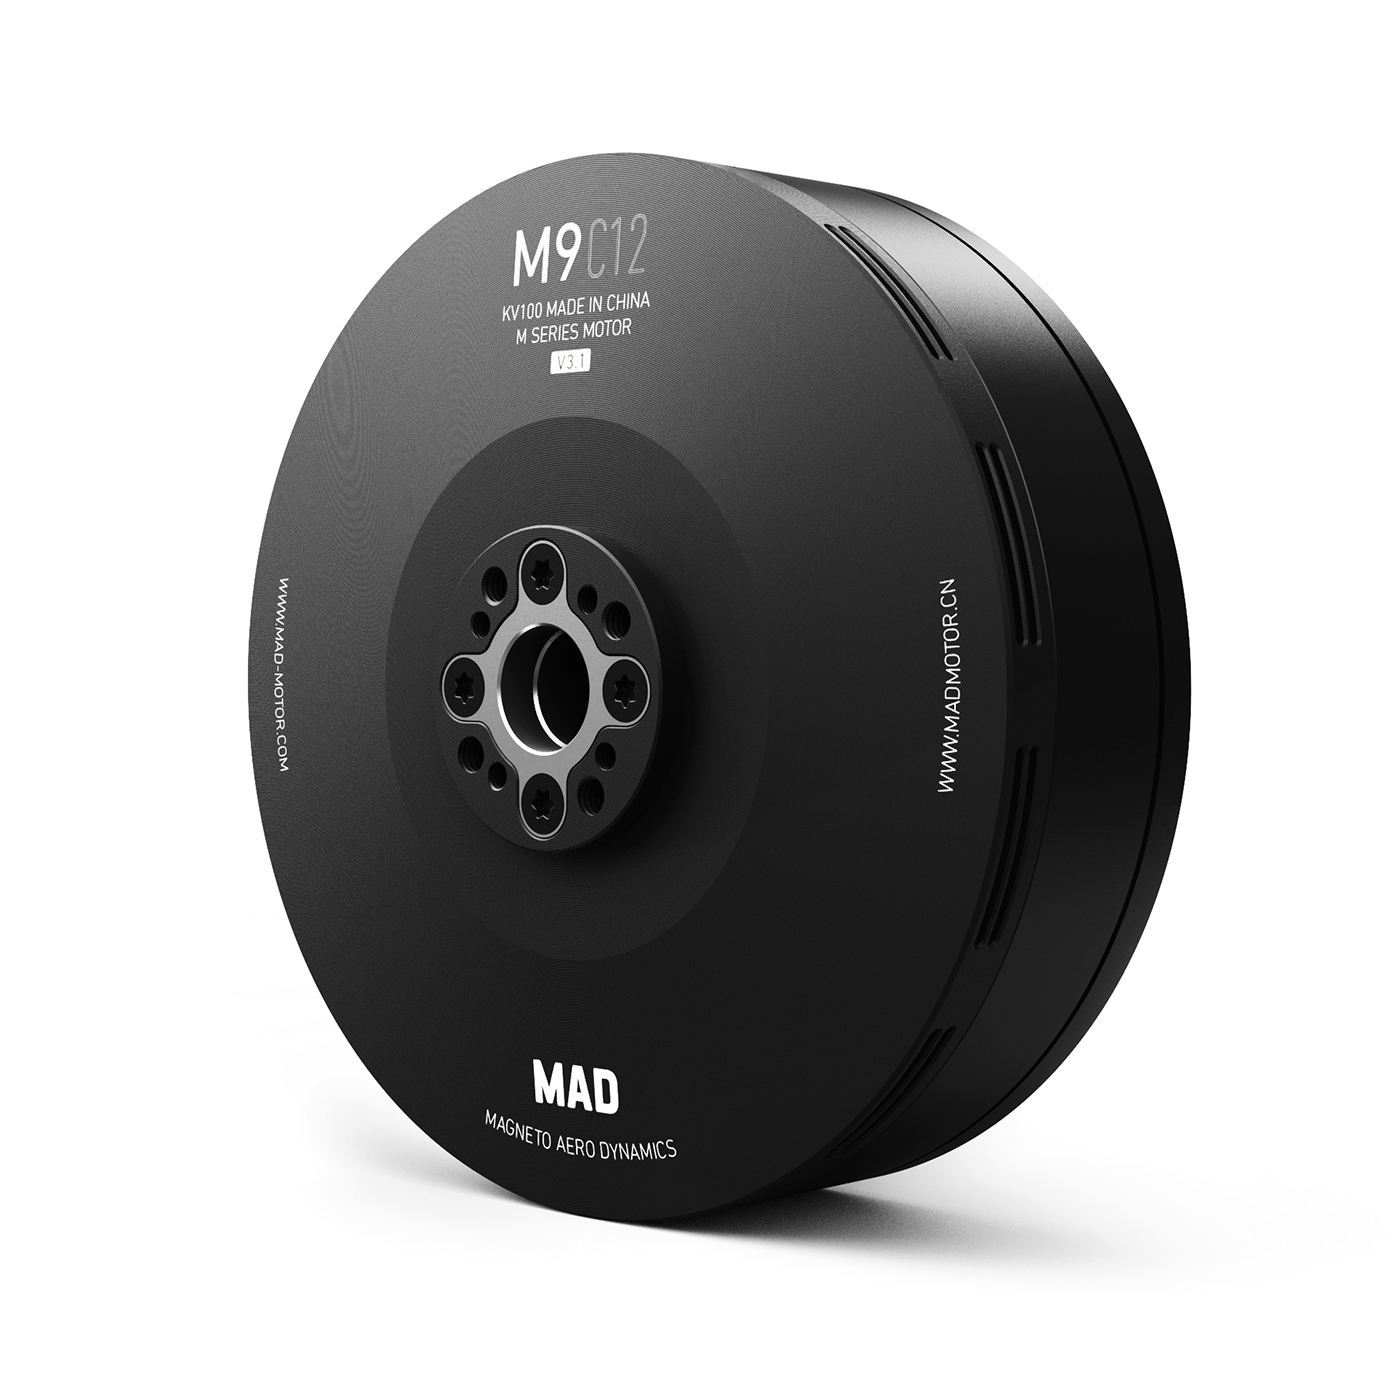 MAD Components M9C12 IPE V3.1 reliable brushless motor for heavy hexacopters, octocopters, and drones used in applications such as sprayer farming, agriculture, firefighting, and tethered operations